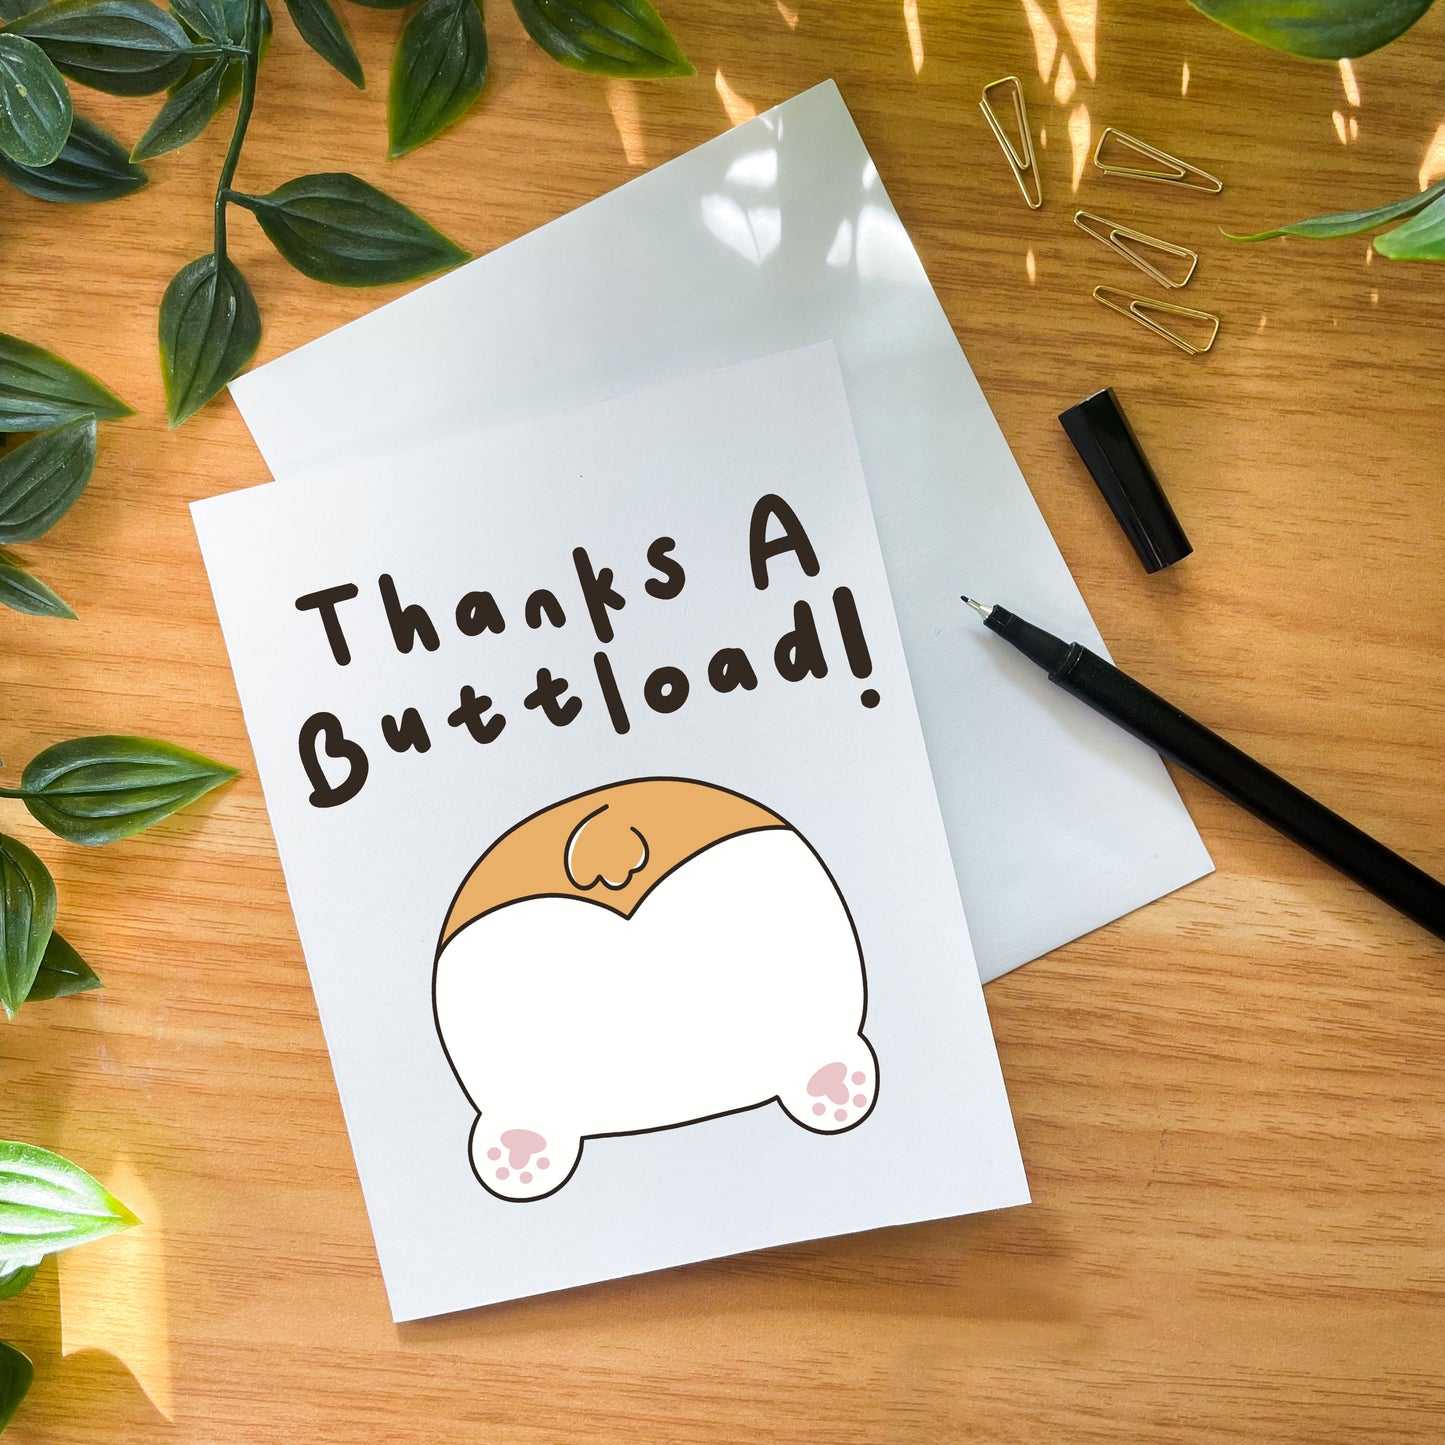 Thanks A Buttload! Greeting Card